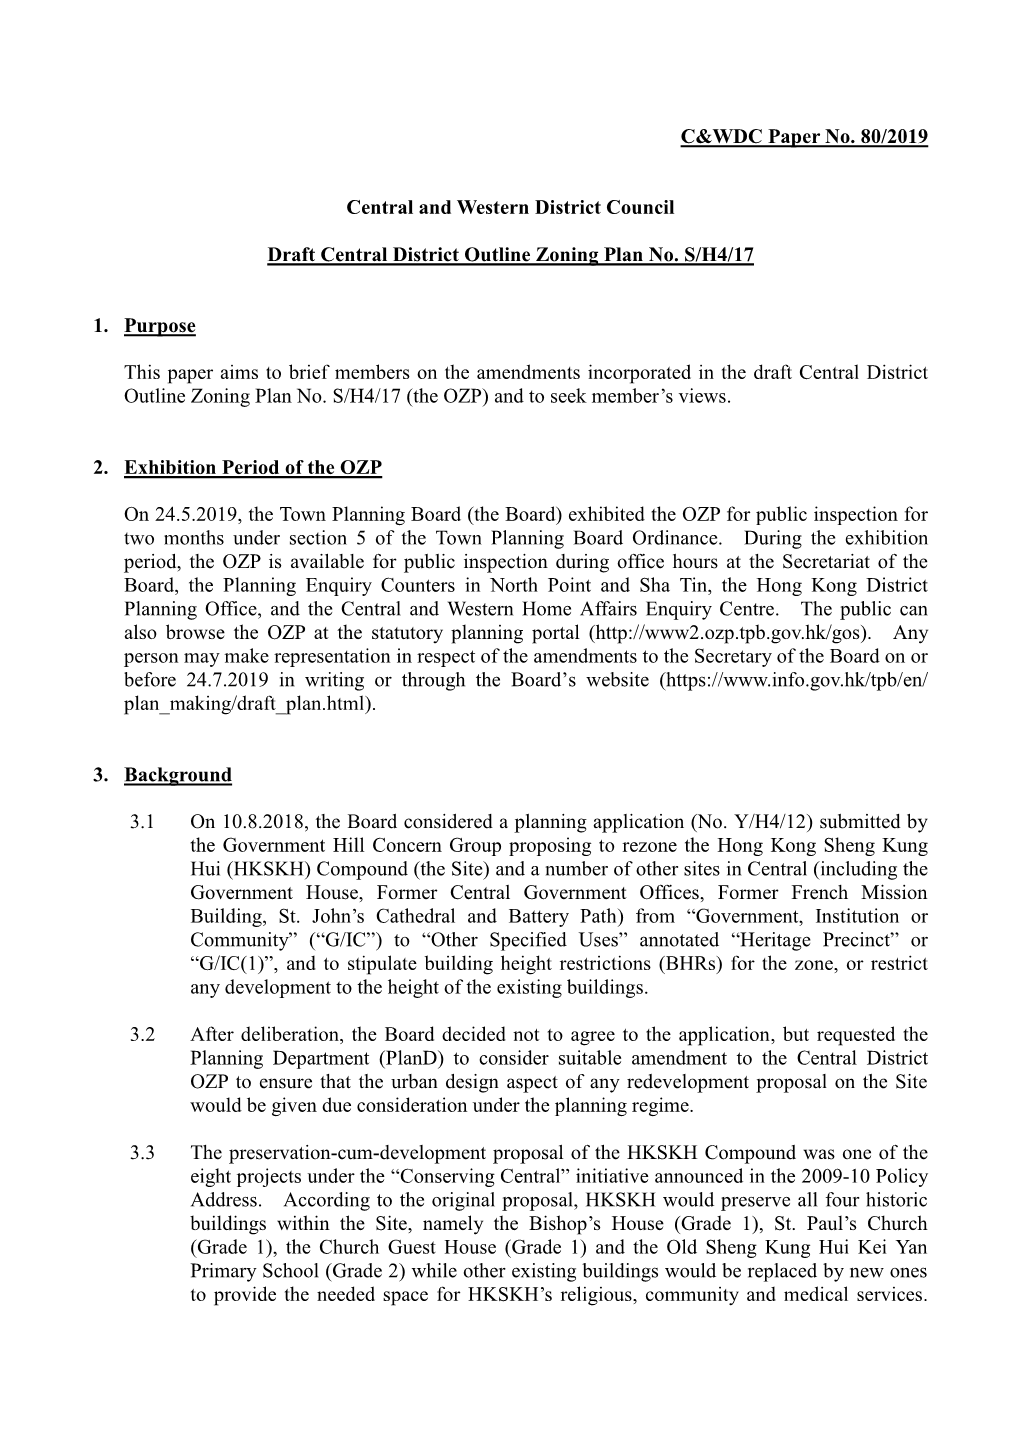 Draft Central District Outline Zoning Plan No. S/H4/17